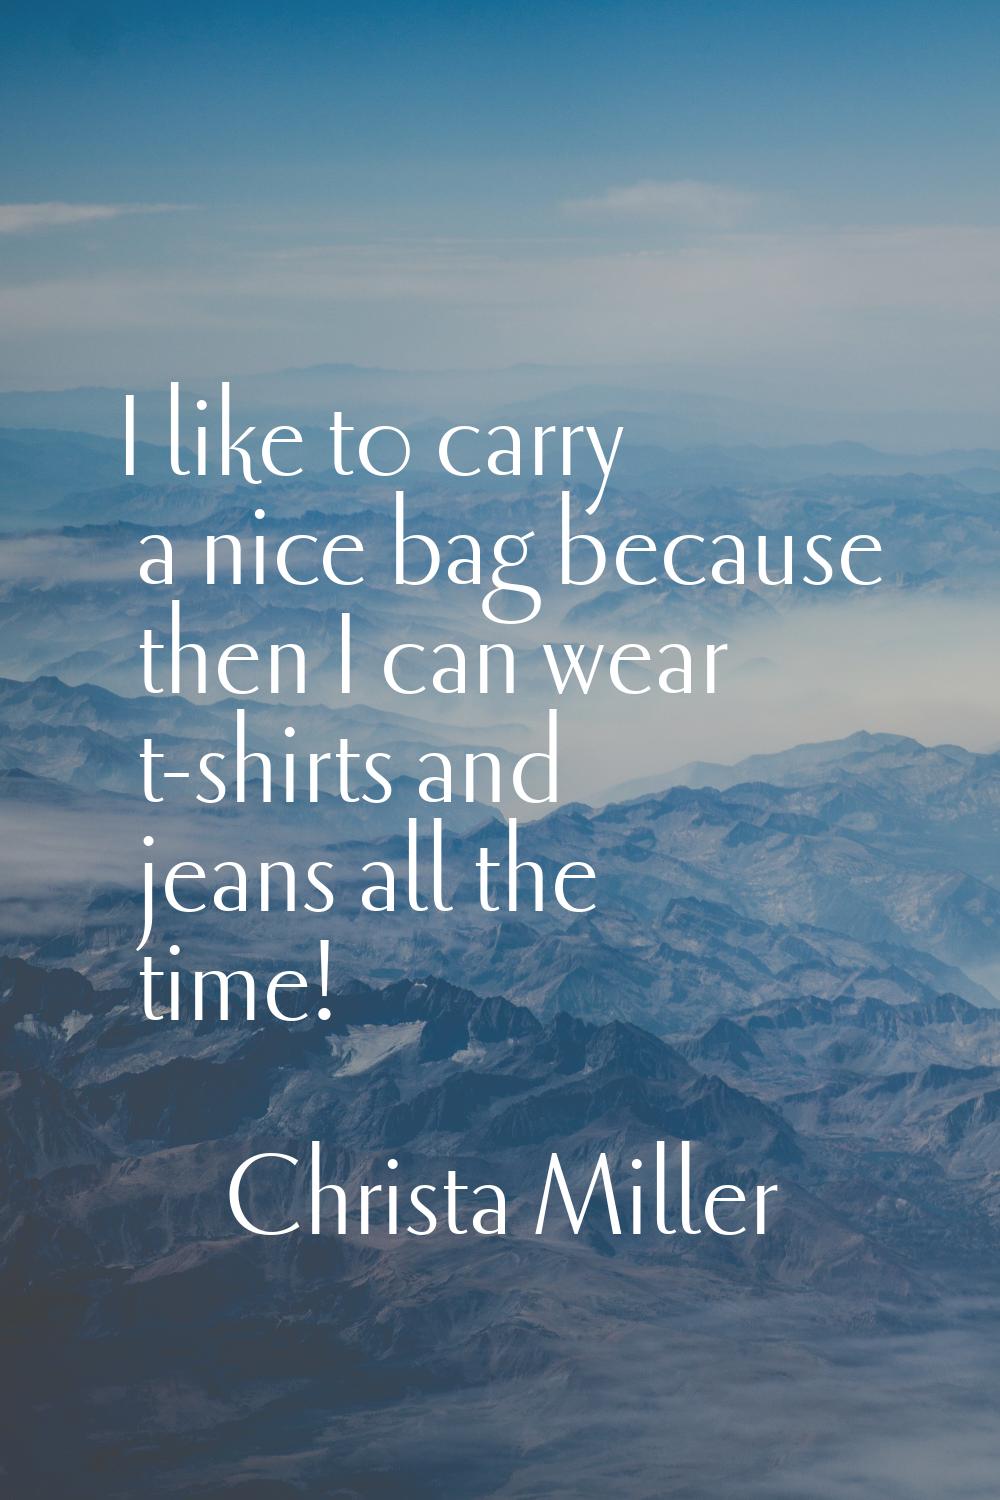 I like to carry a nice bag because then I can wear t-shirts and jeans all the time!